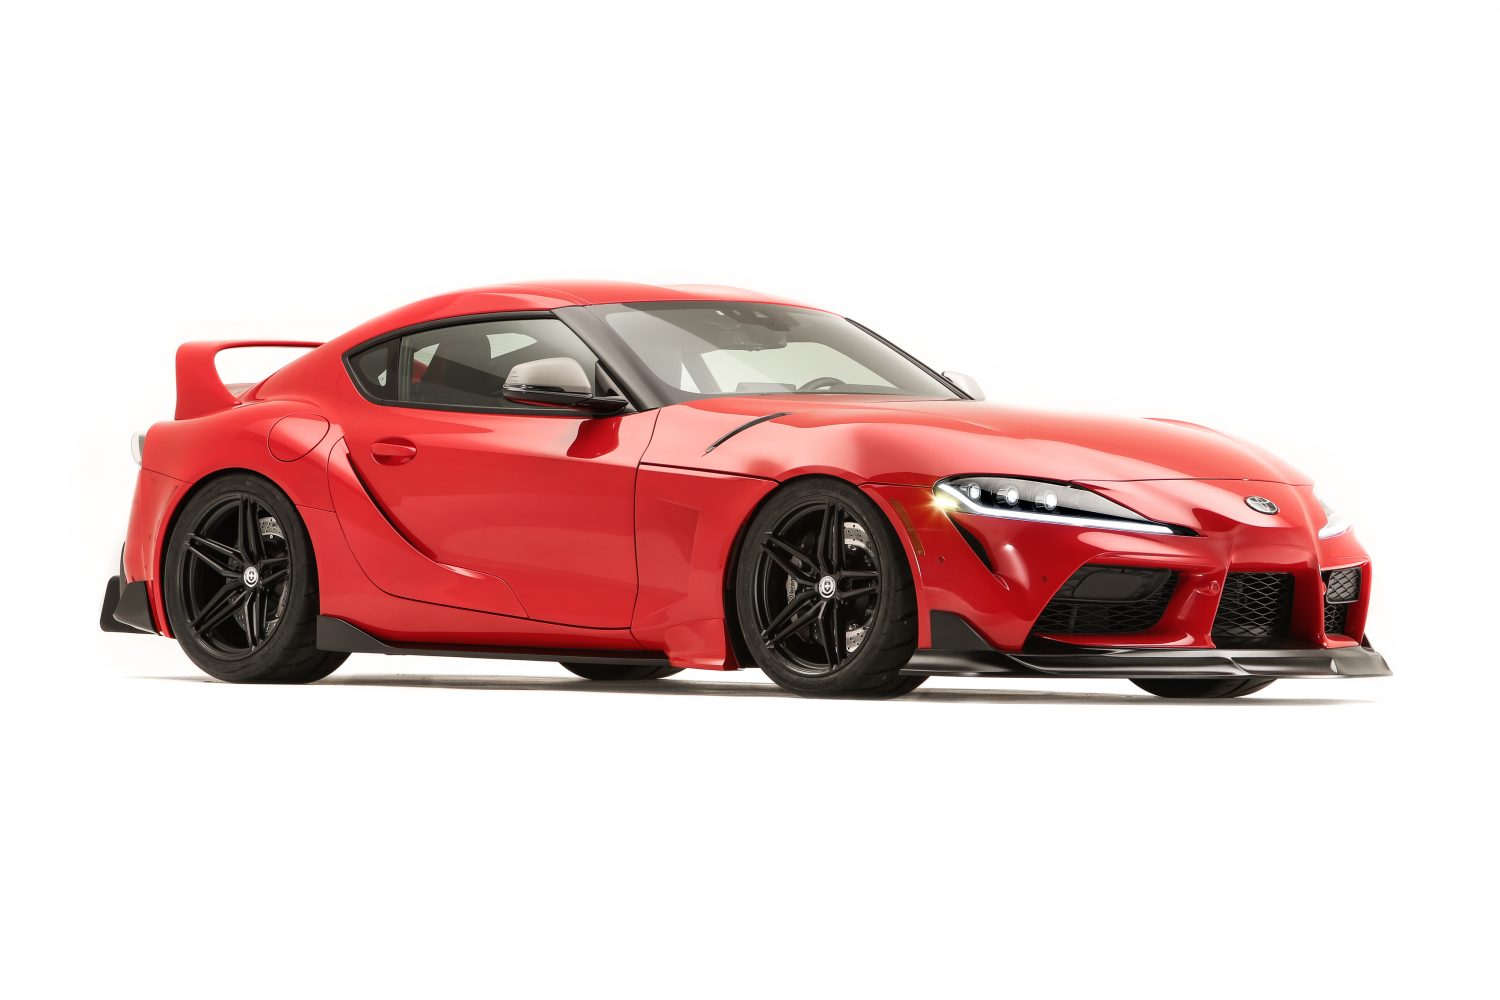 2020 Toyota Gr-Supra oem parts and accessories on sale